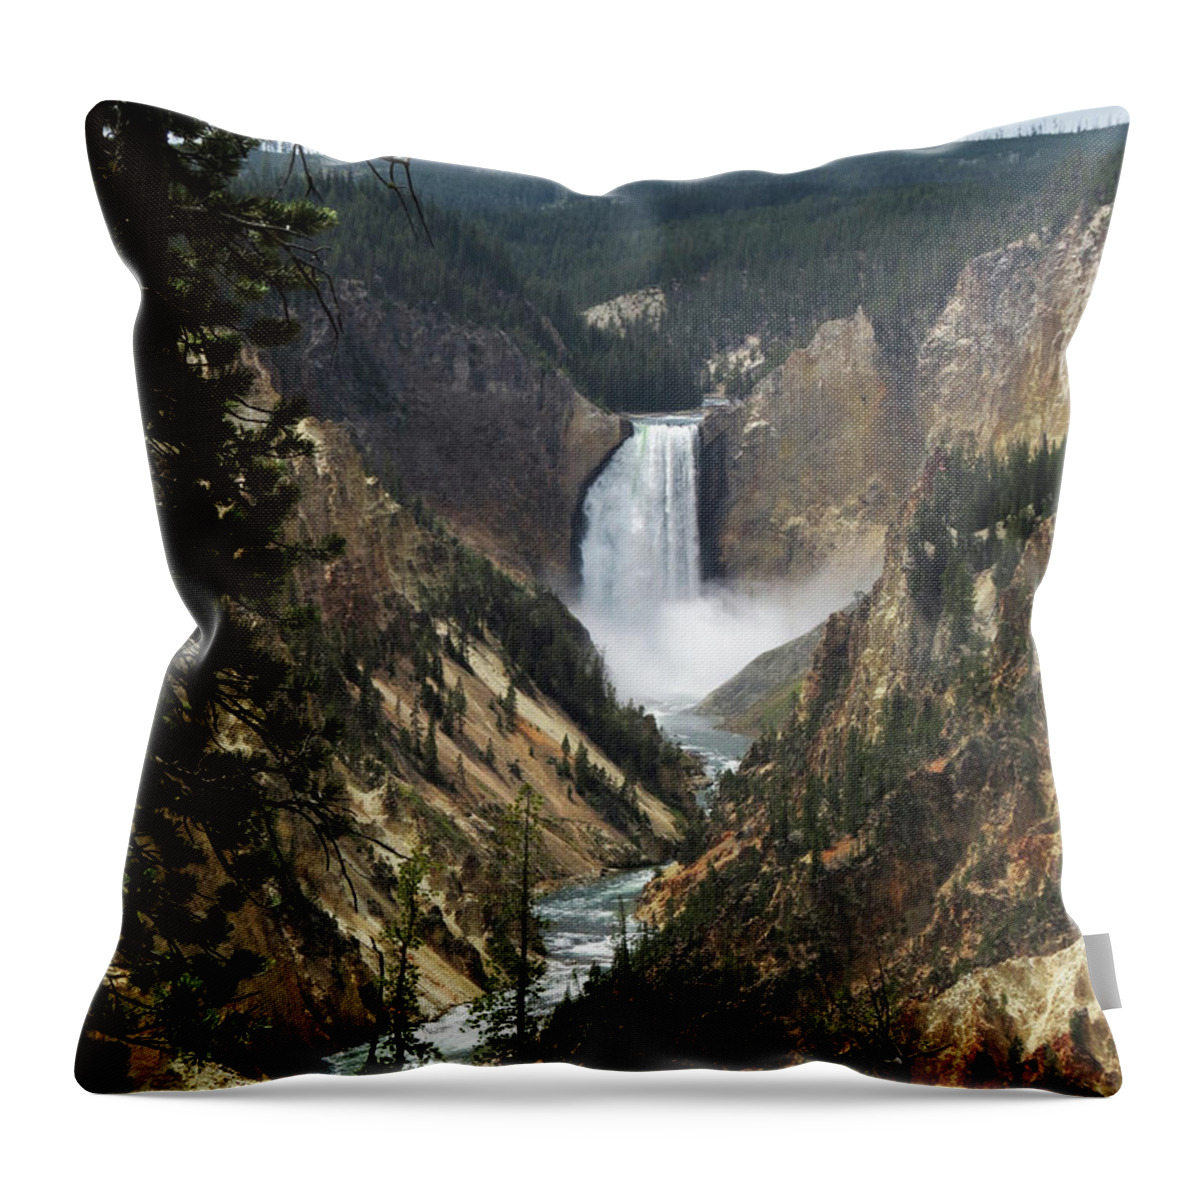 Yellowstone Throw Pillow featuring the photograph Yellowstone Falls by Laurel Powell